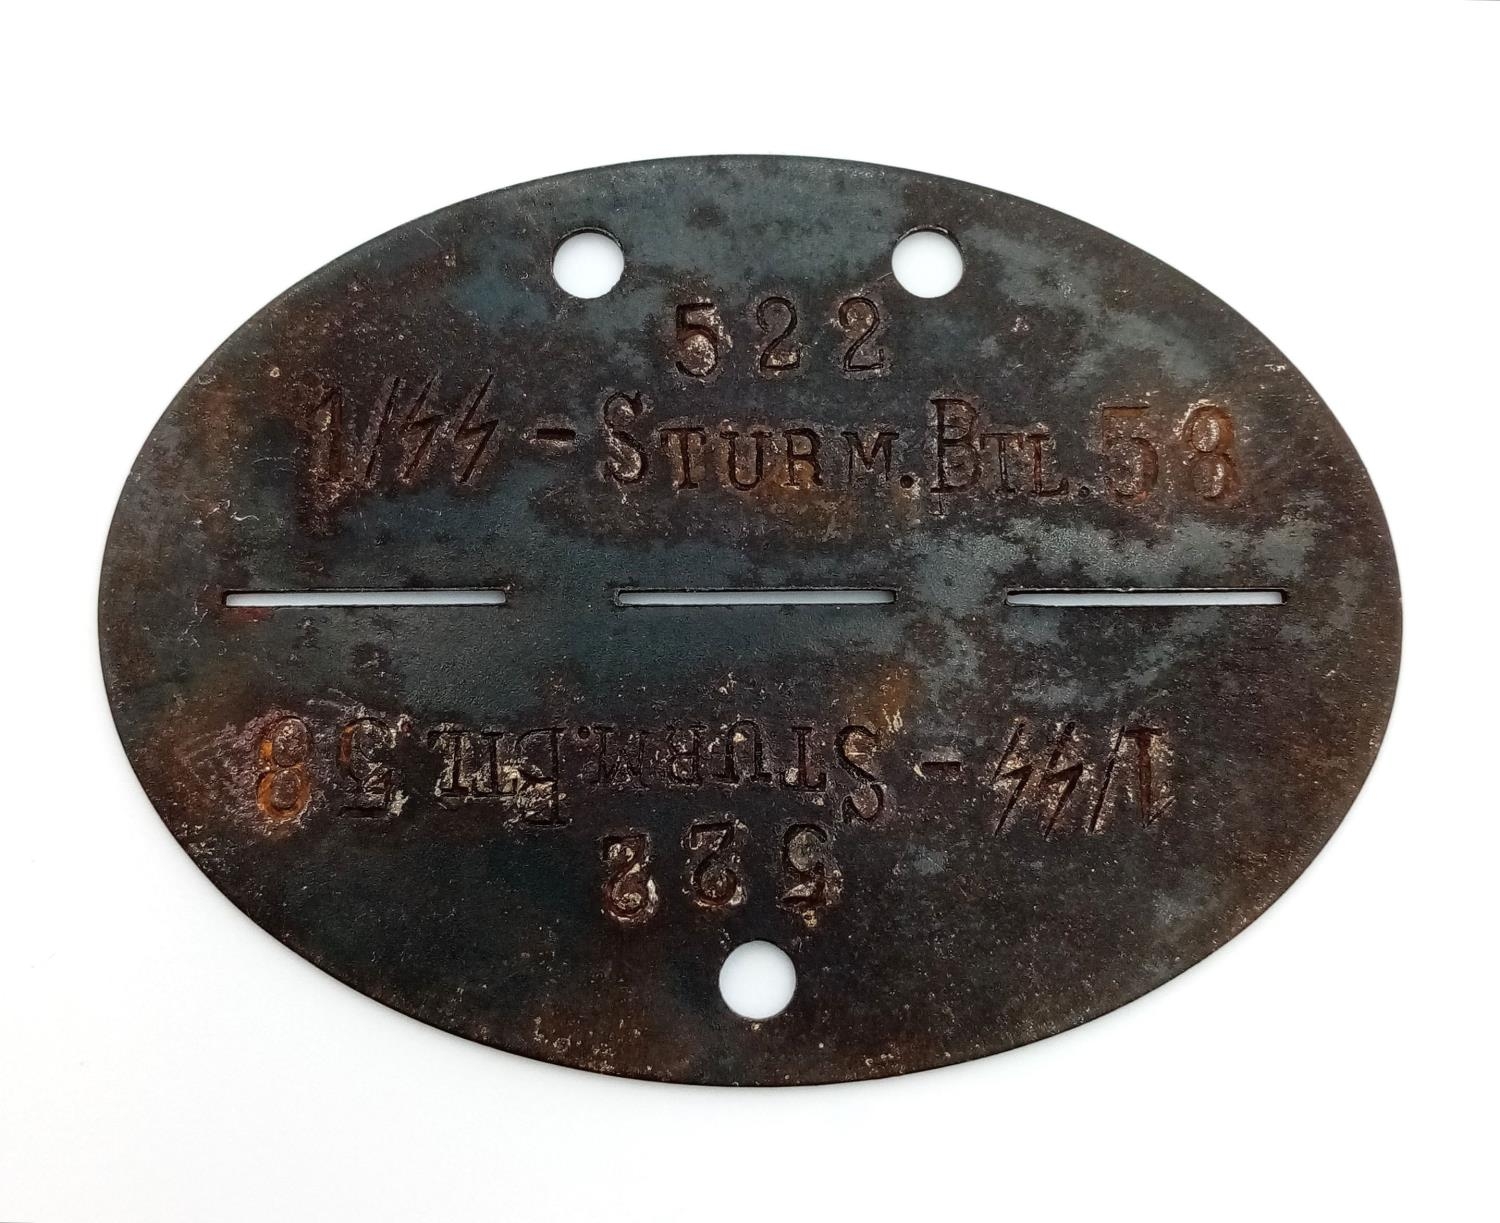 WW2 German Waffen SS Dog Tag to a soldier in the “Sturm” Battalion. A unit made up of foreign